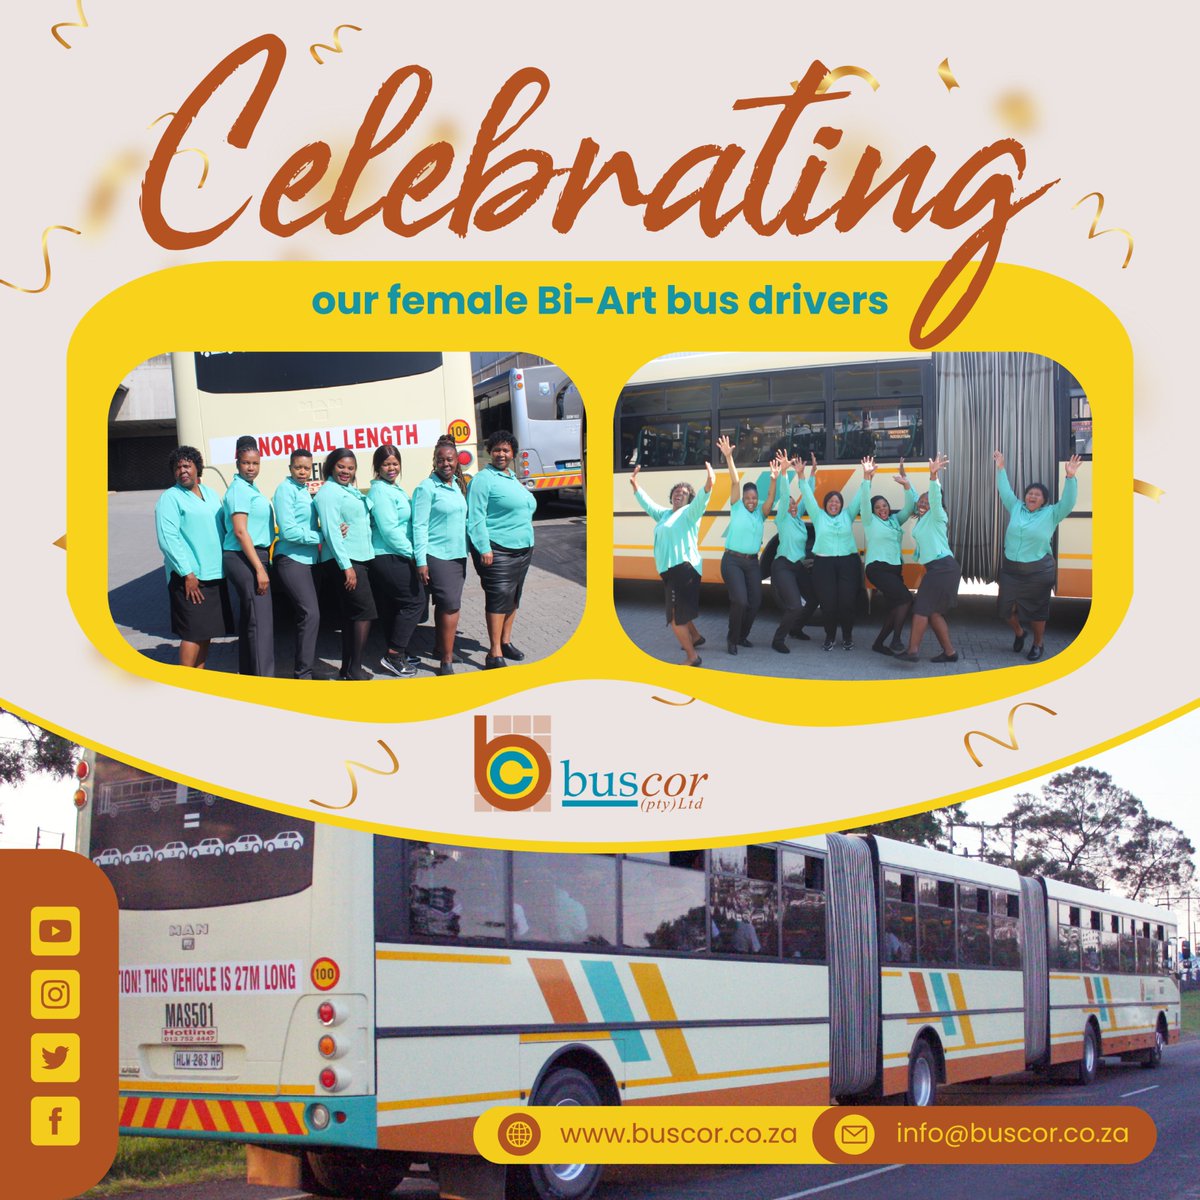 Buscor is a pioneer and leading operator of Bi-Articulated buses in the African continent. These buses require specially trained drivers. We are very proud to celebrate our female drivers who daily operate these massive vehicles. 
#BuscorRock #BiArticulatedBuses